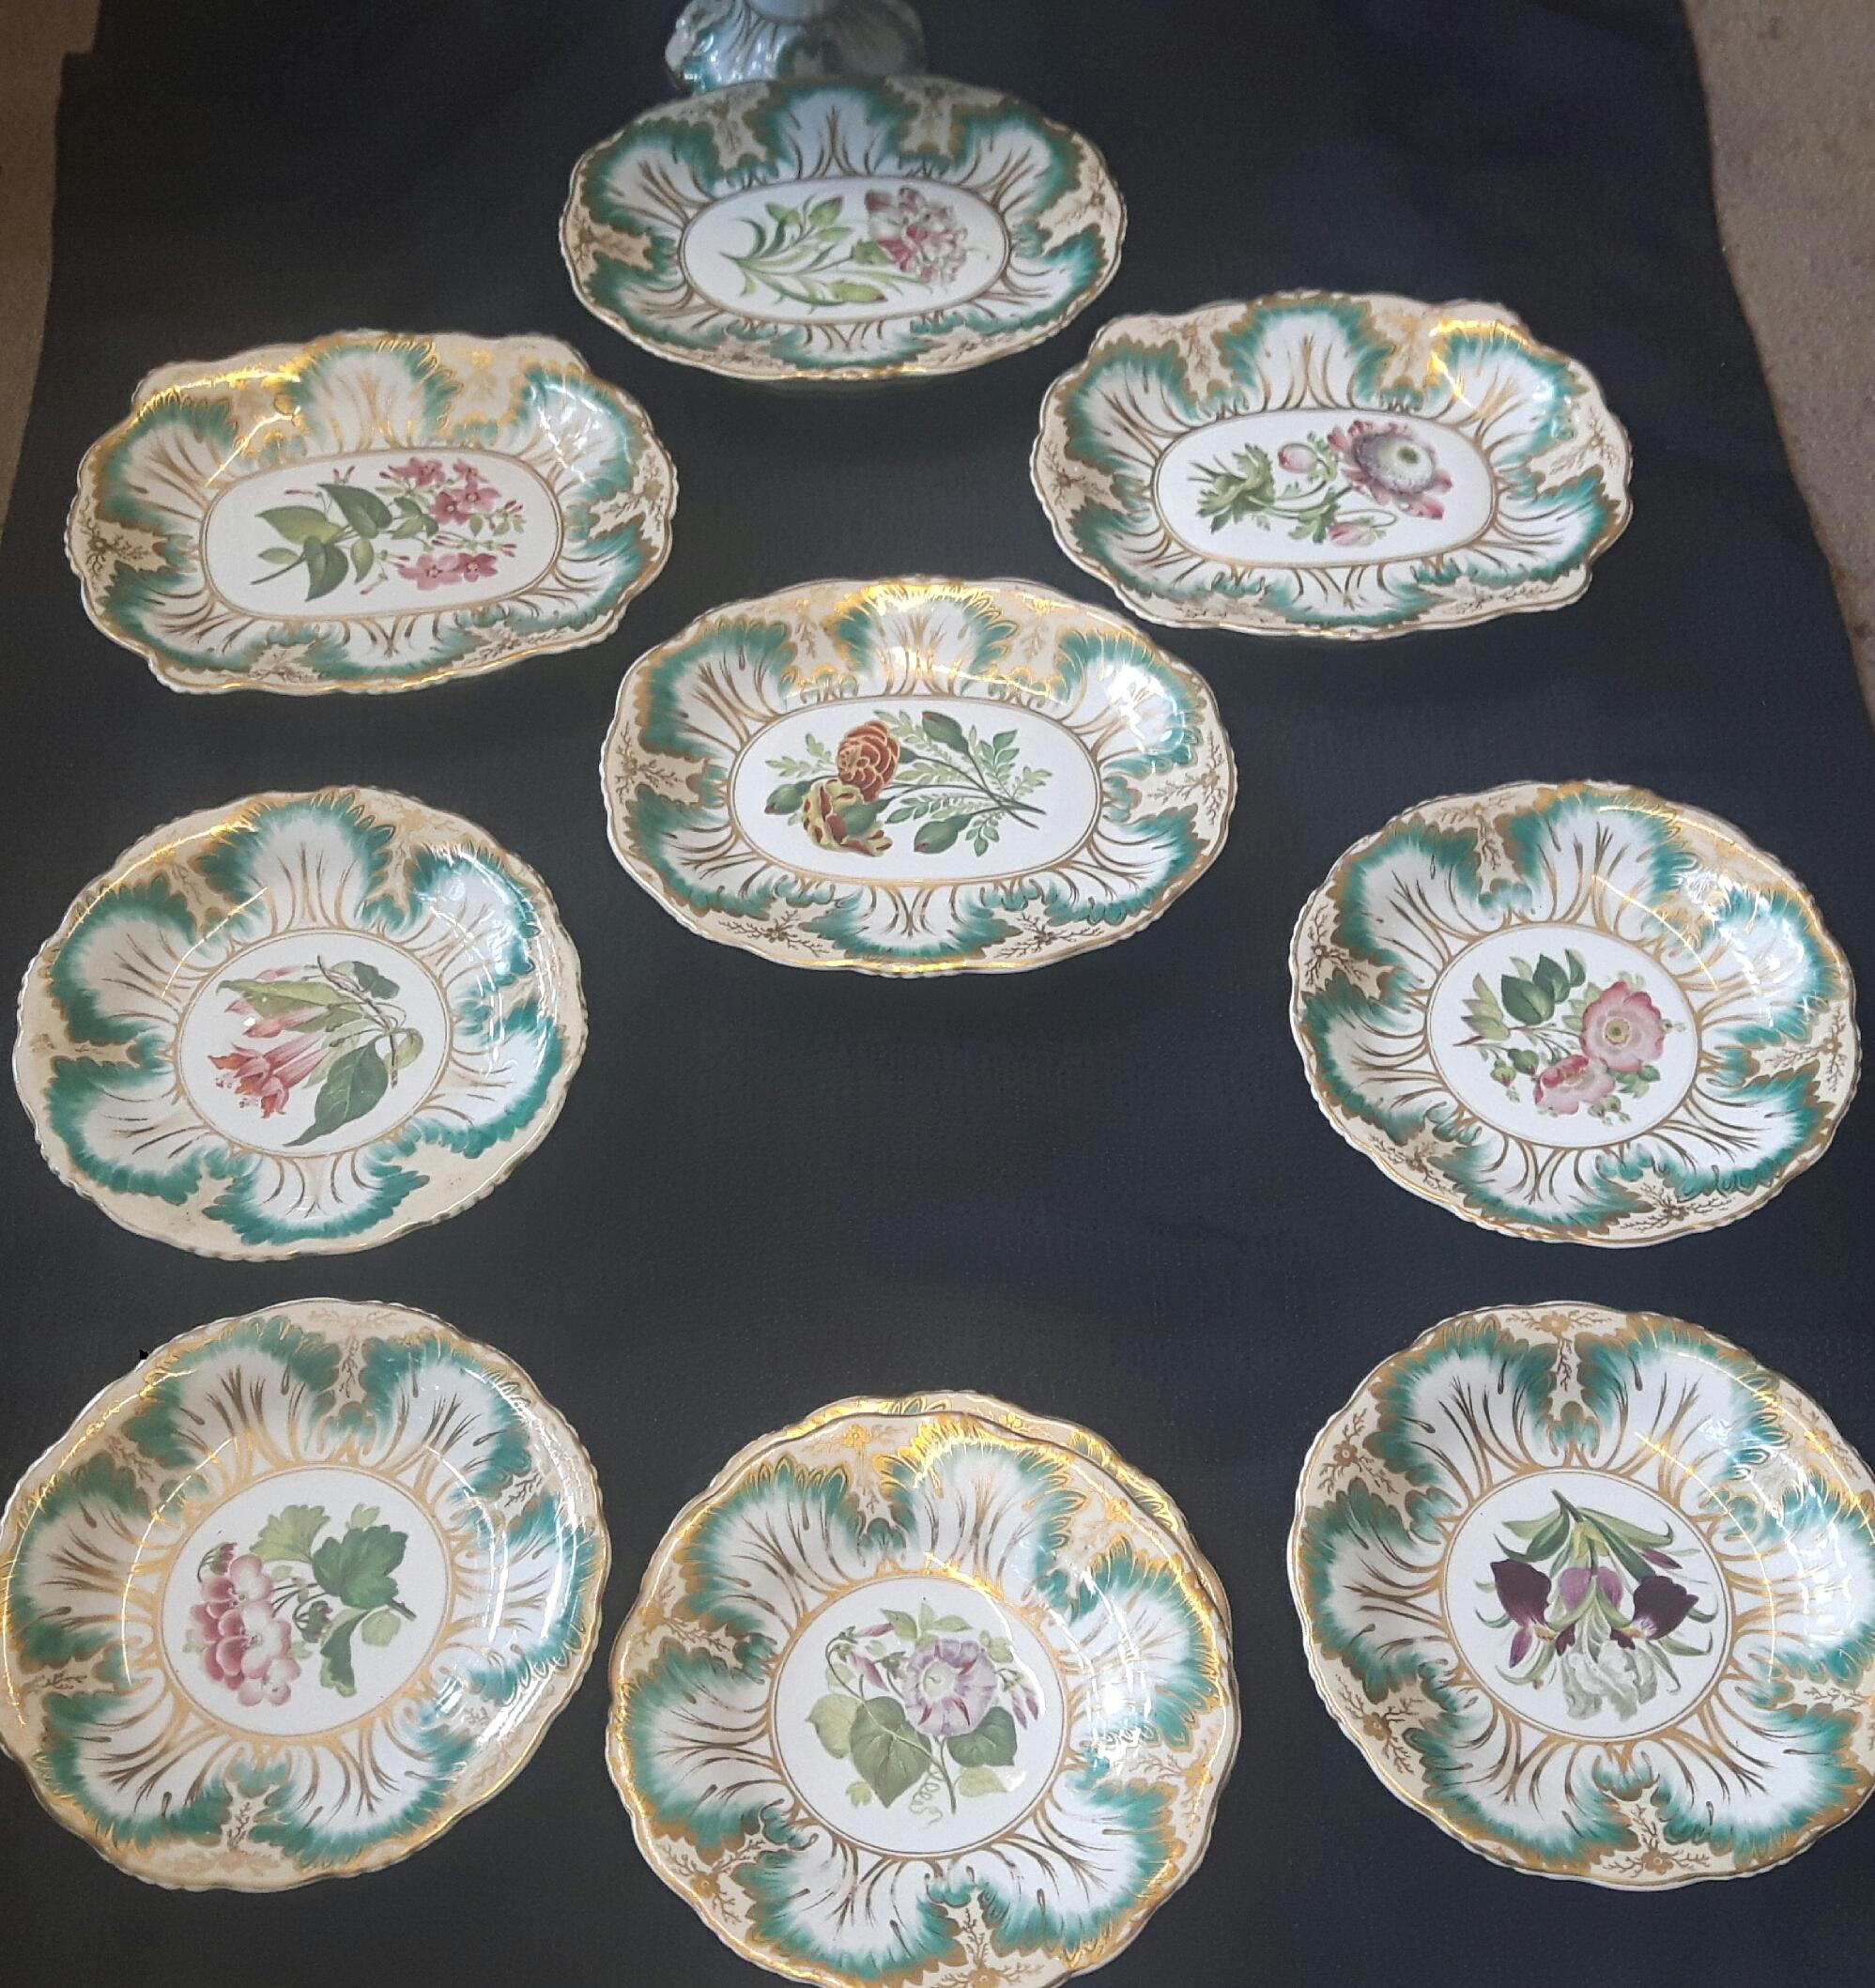 A Staffordshire porcelain botanical dessert service painted with flower
specimens inside green leaf and gilt borders, comprising: fourteen plates, four oval stands, four circular stands and a comport, impressed wreath and anchor mark, painted